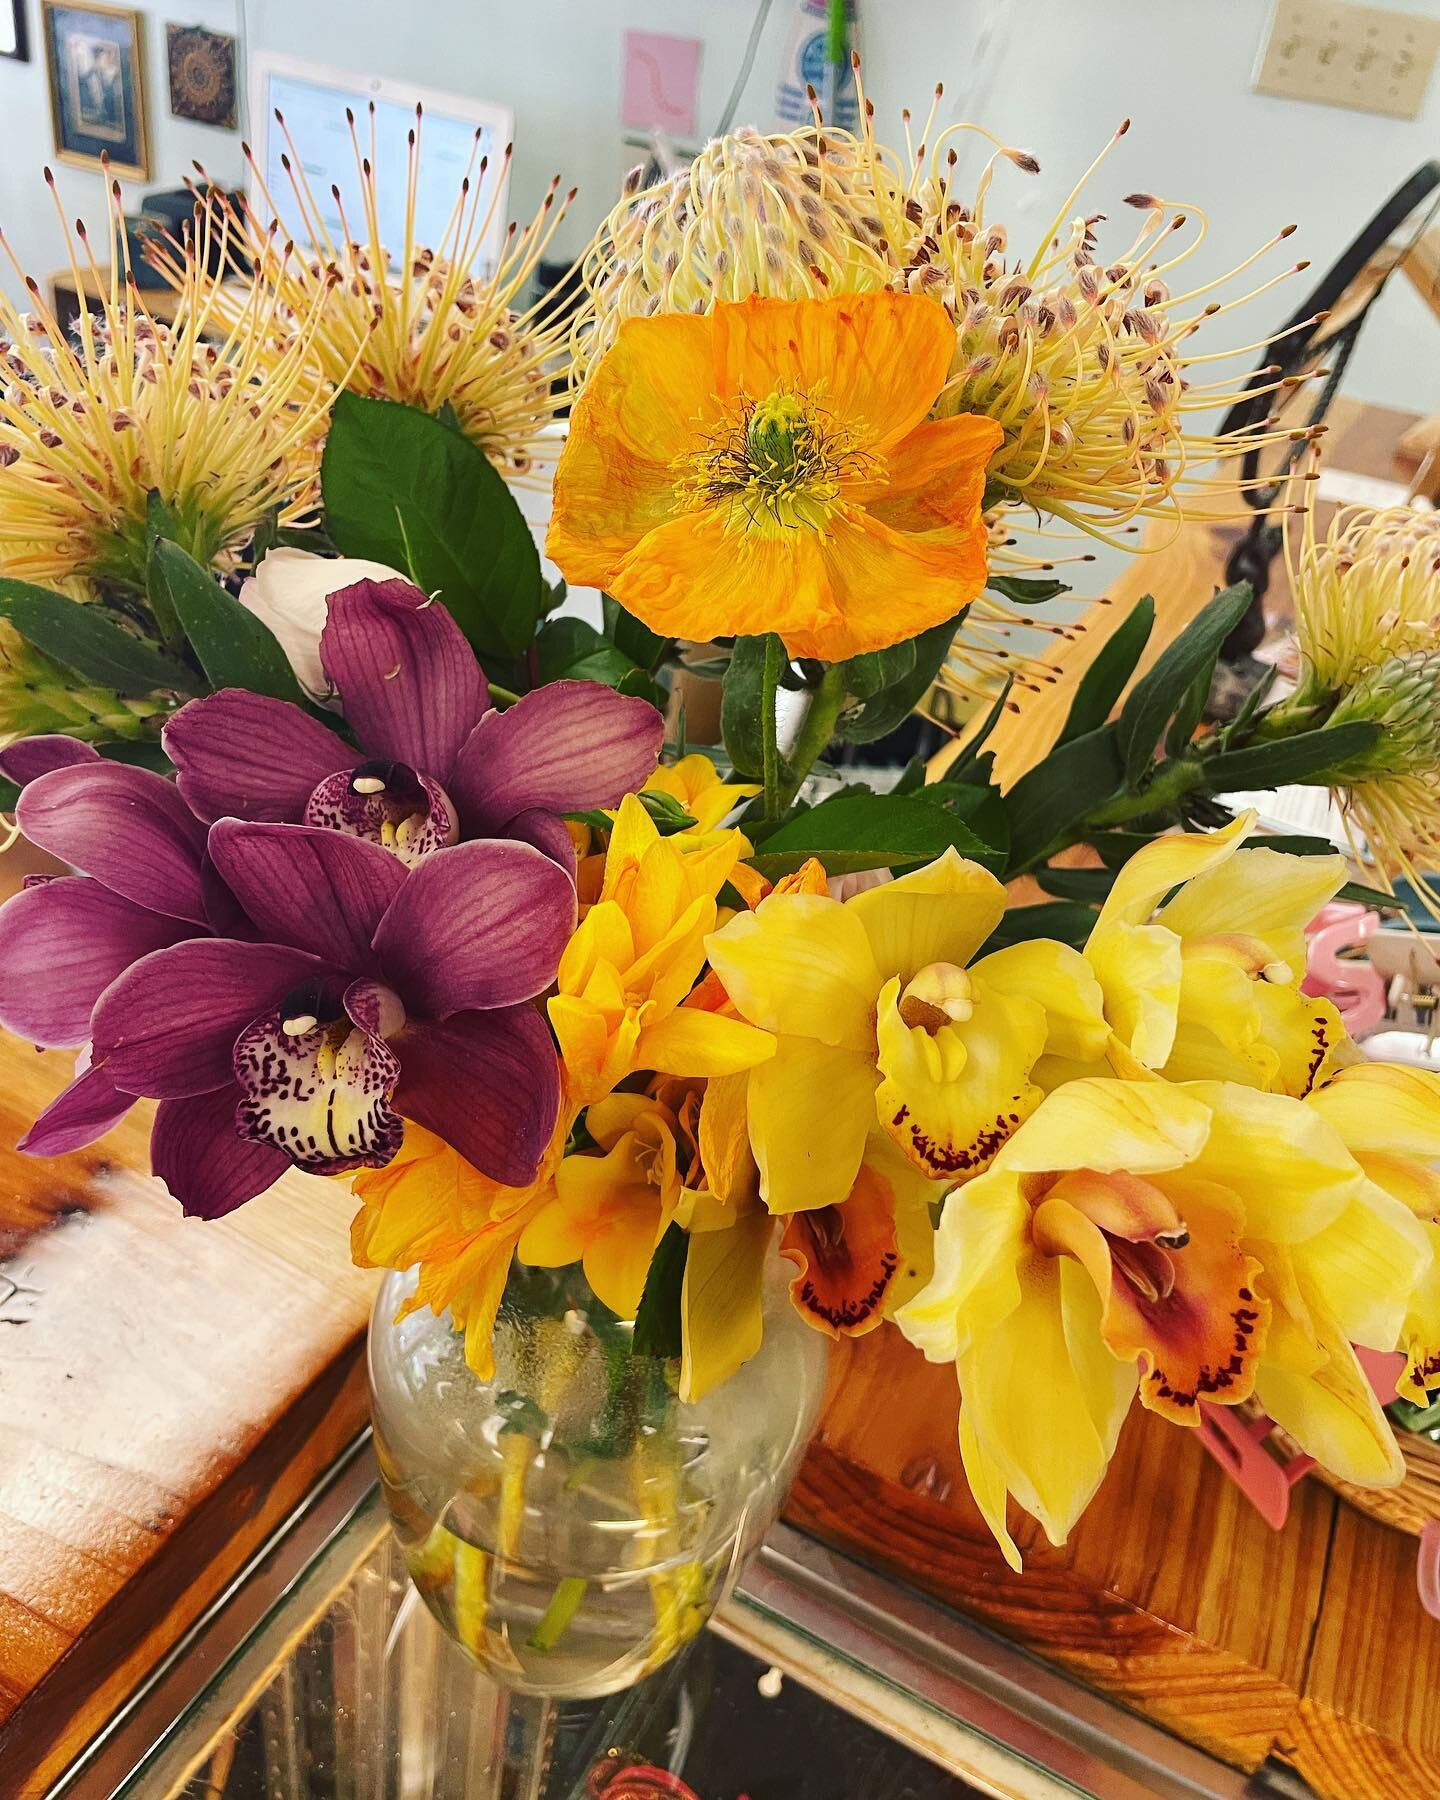 Beautiful flowers from a Launch regulars&rsquo; very own garden. 🥰One of these days I&rsquo;ll capture a picture of her alongside them to give her green thumb some credit!

#floralarrangement #flowerstagram 
#loveourcustomers 
#bohostyle #ecofriendl